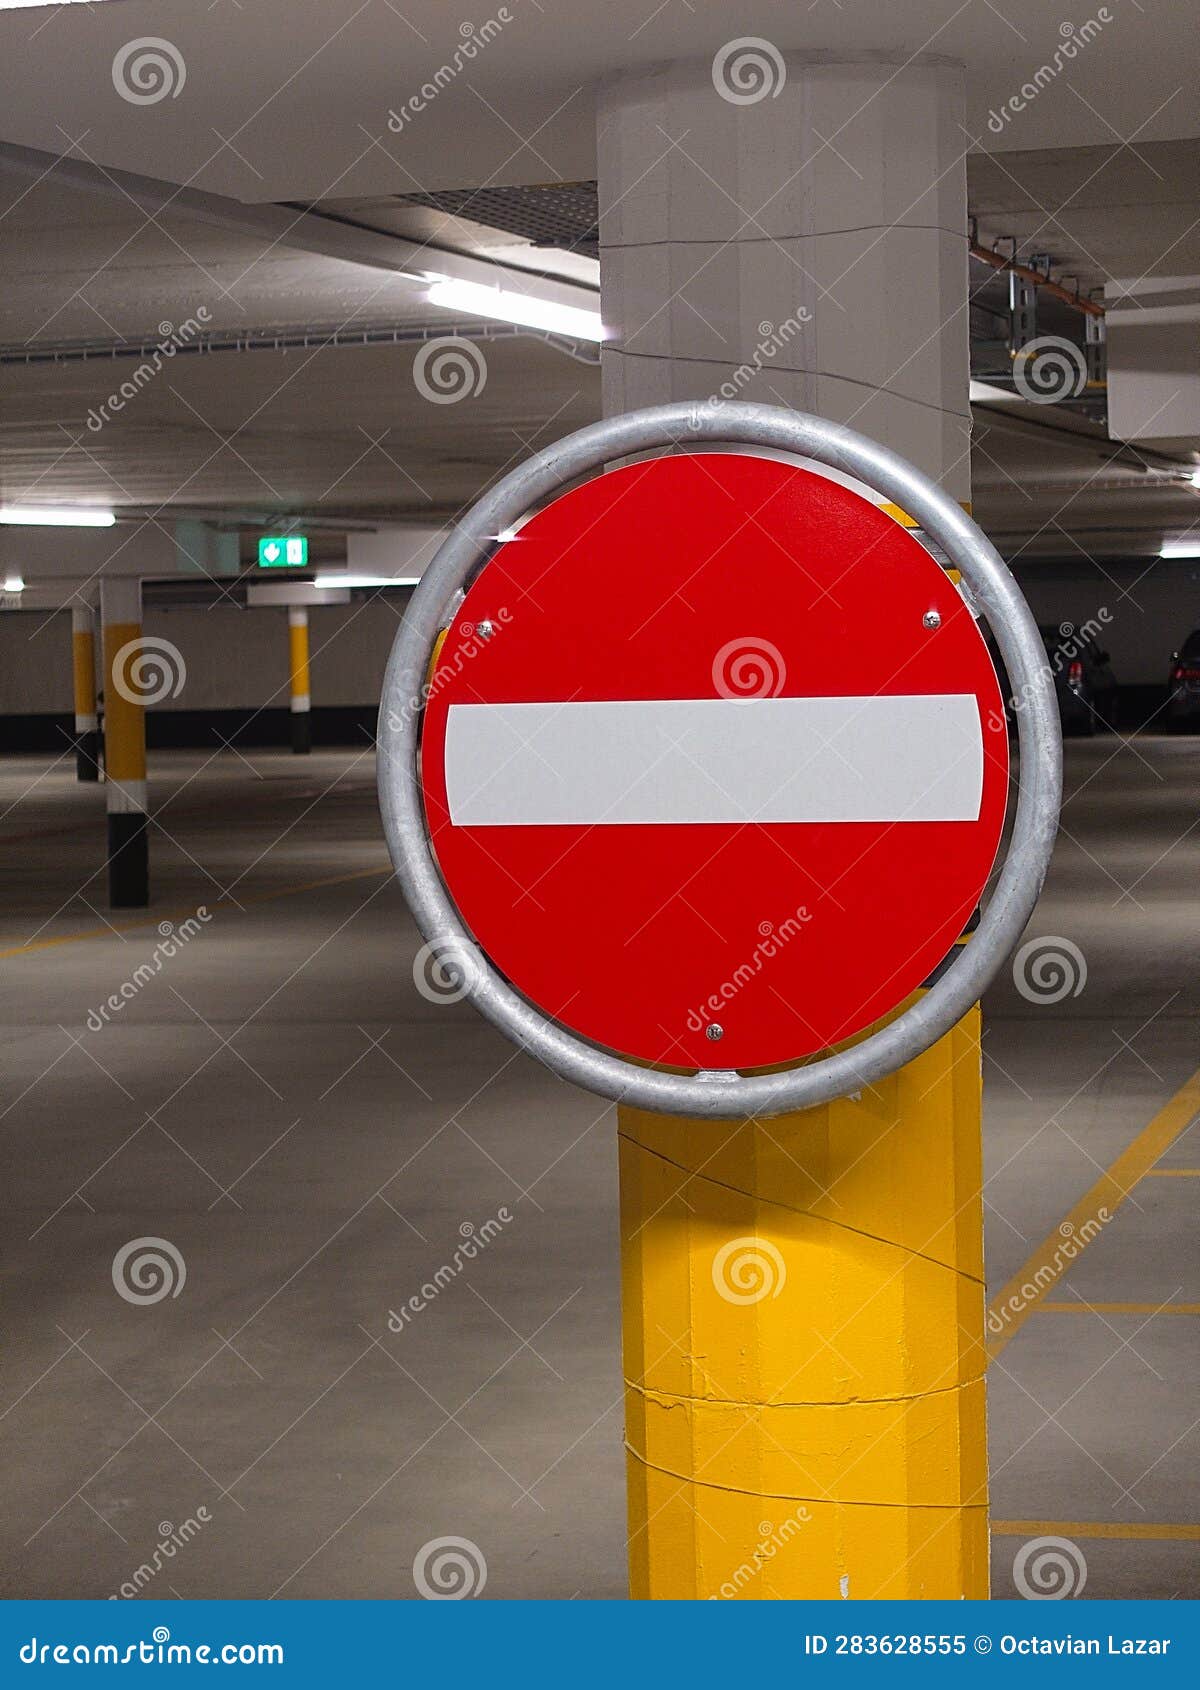 Access Prohibited or Forbidden Access Road Traffic Sign on a Pole Inside  Underground Car Park, No People Stock Image - Image of icon, roadside:  283628555